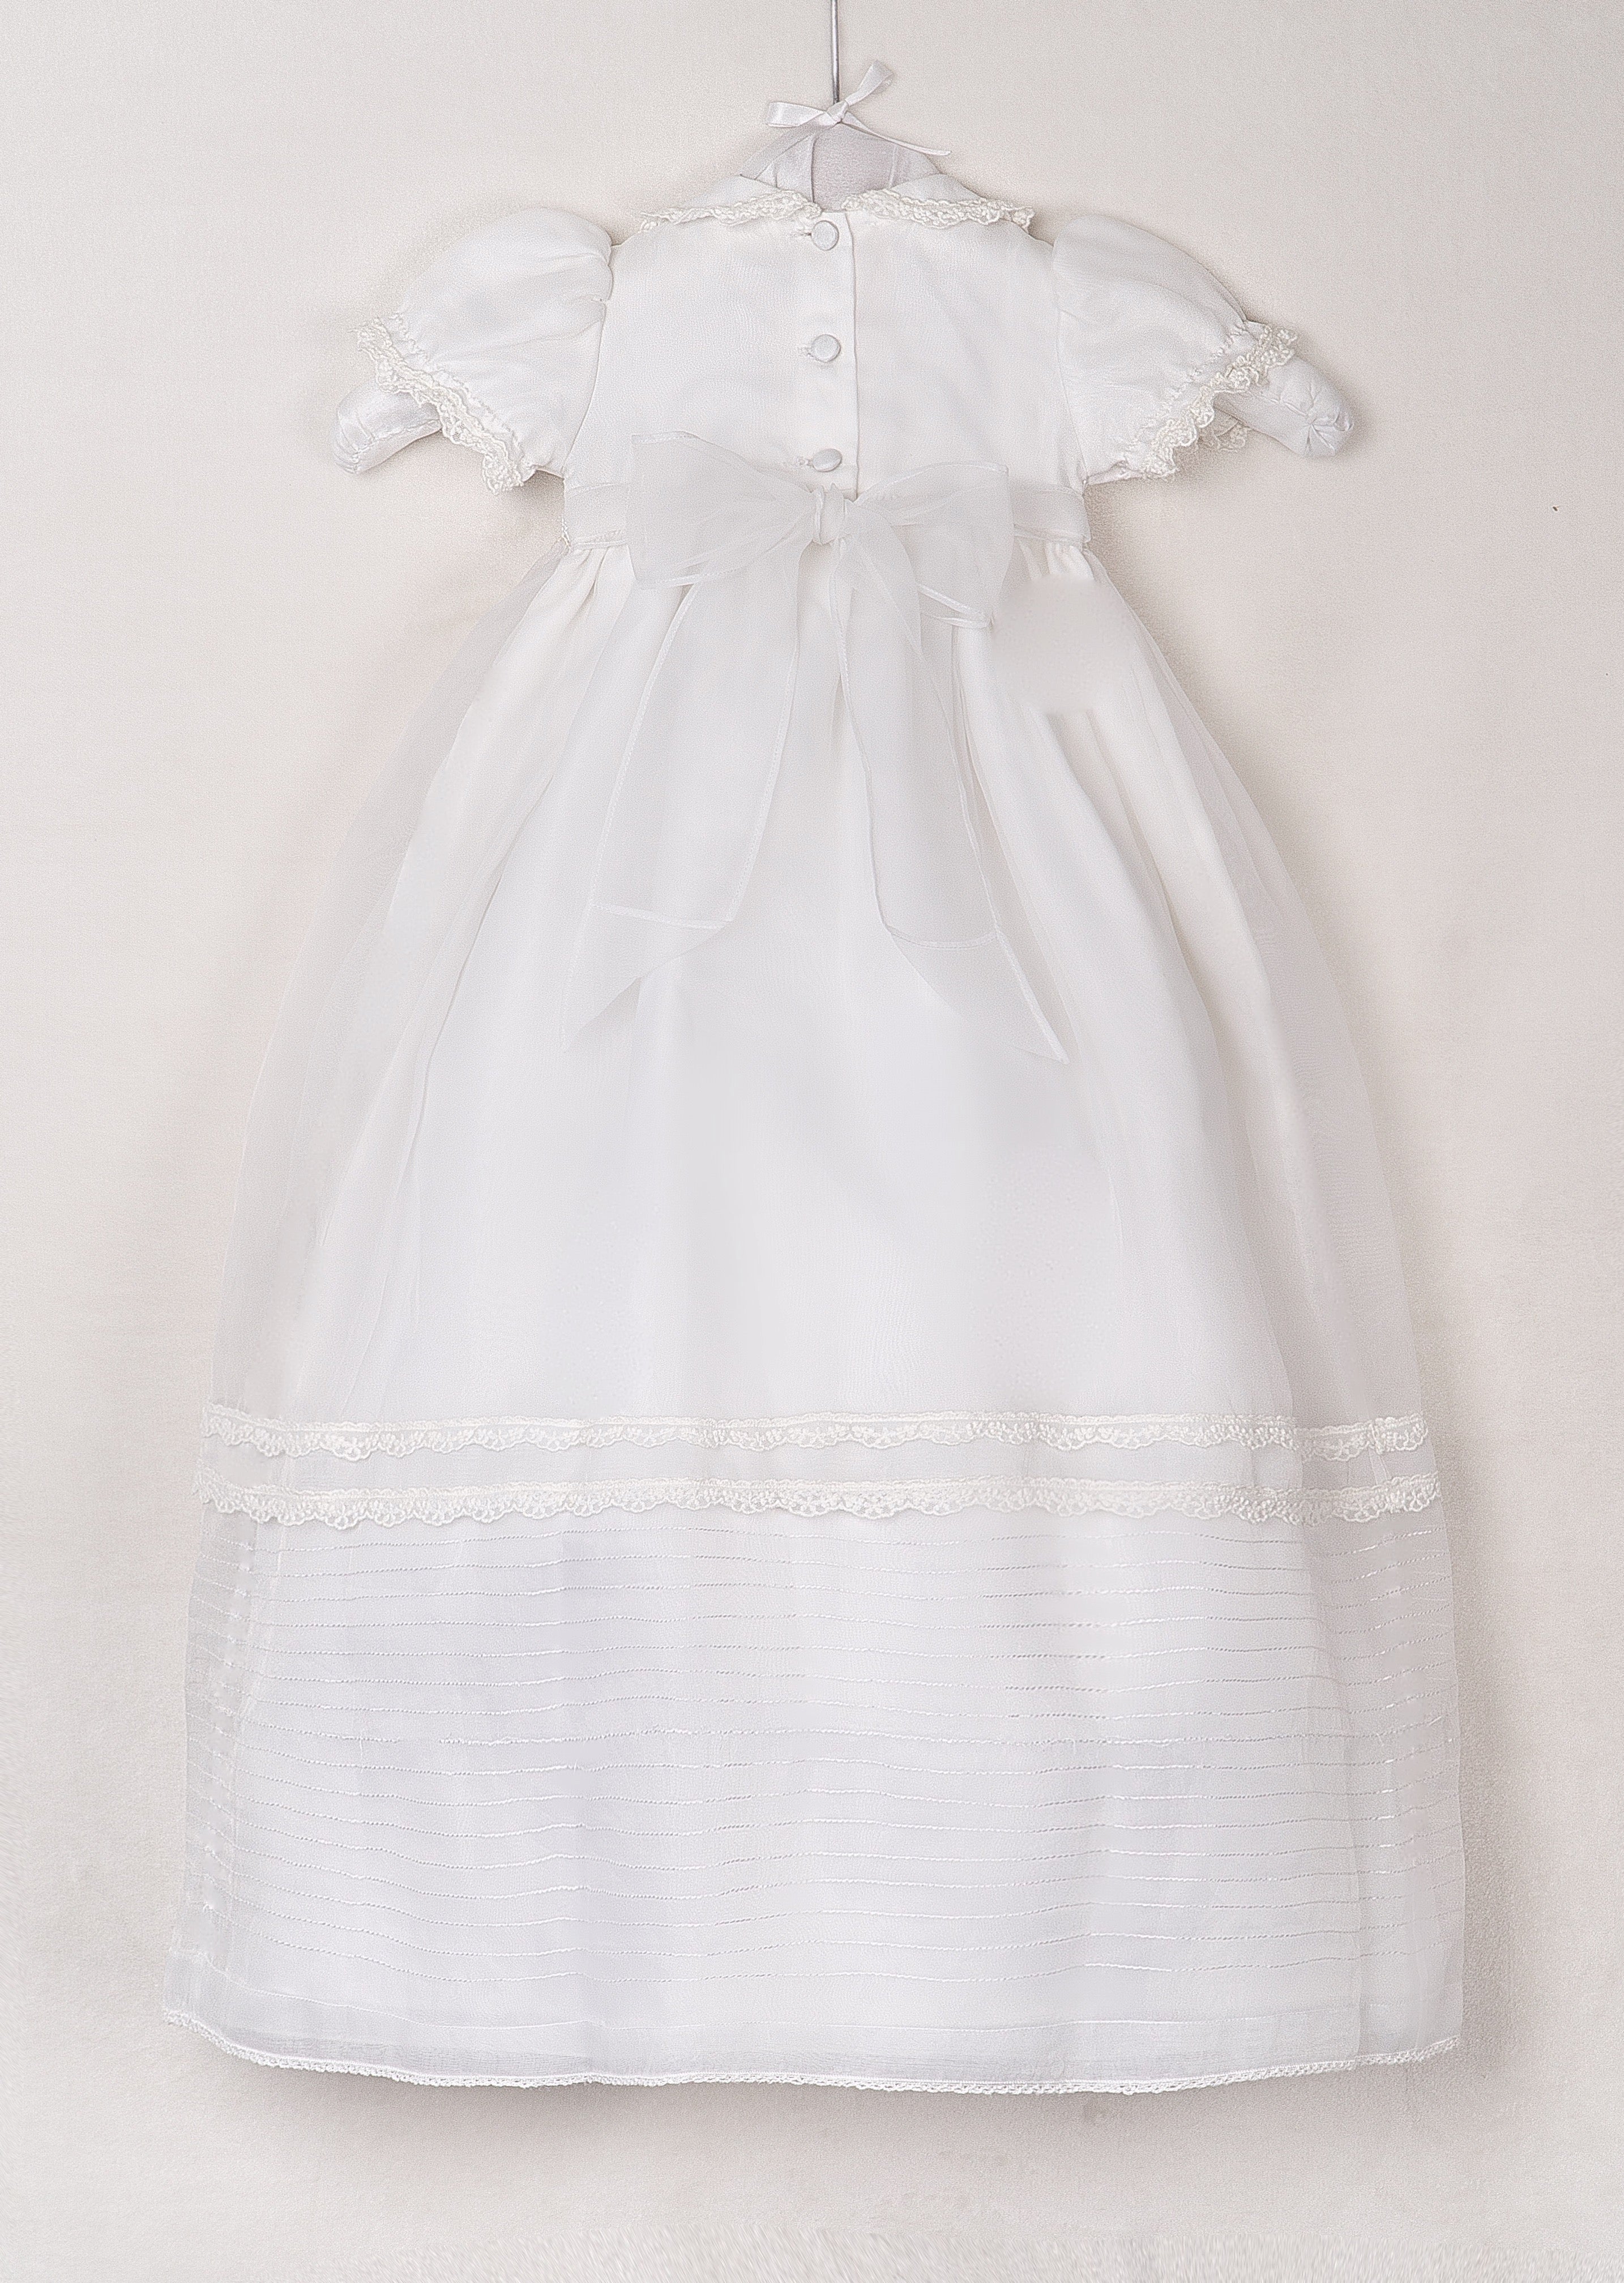 Pick Lovely Unique Baby Girl Baptism Dresses and Gowns